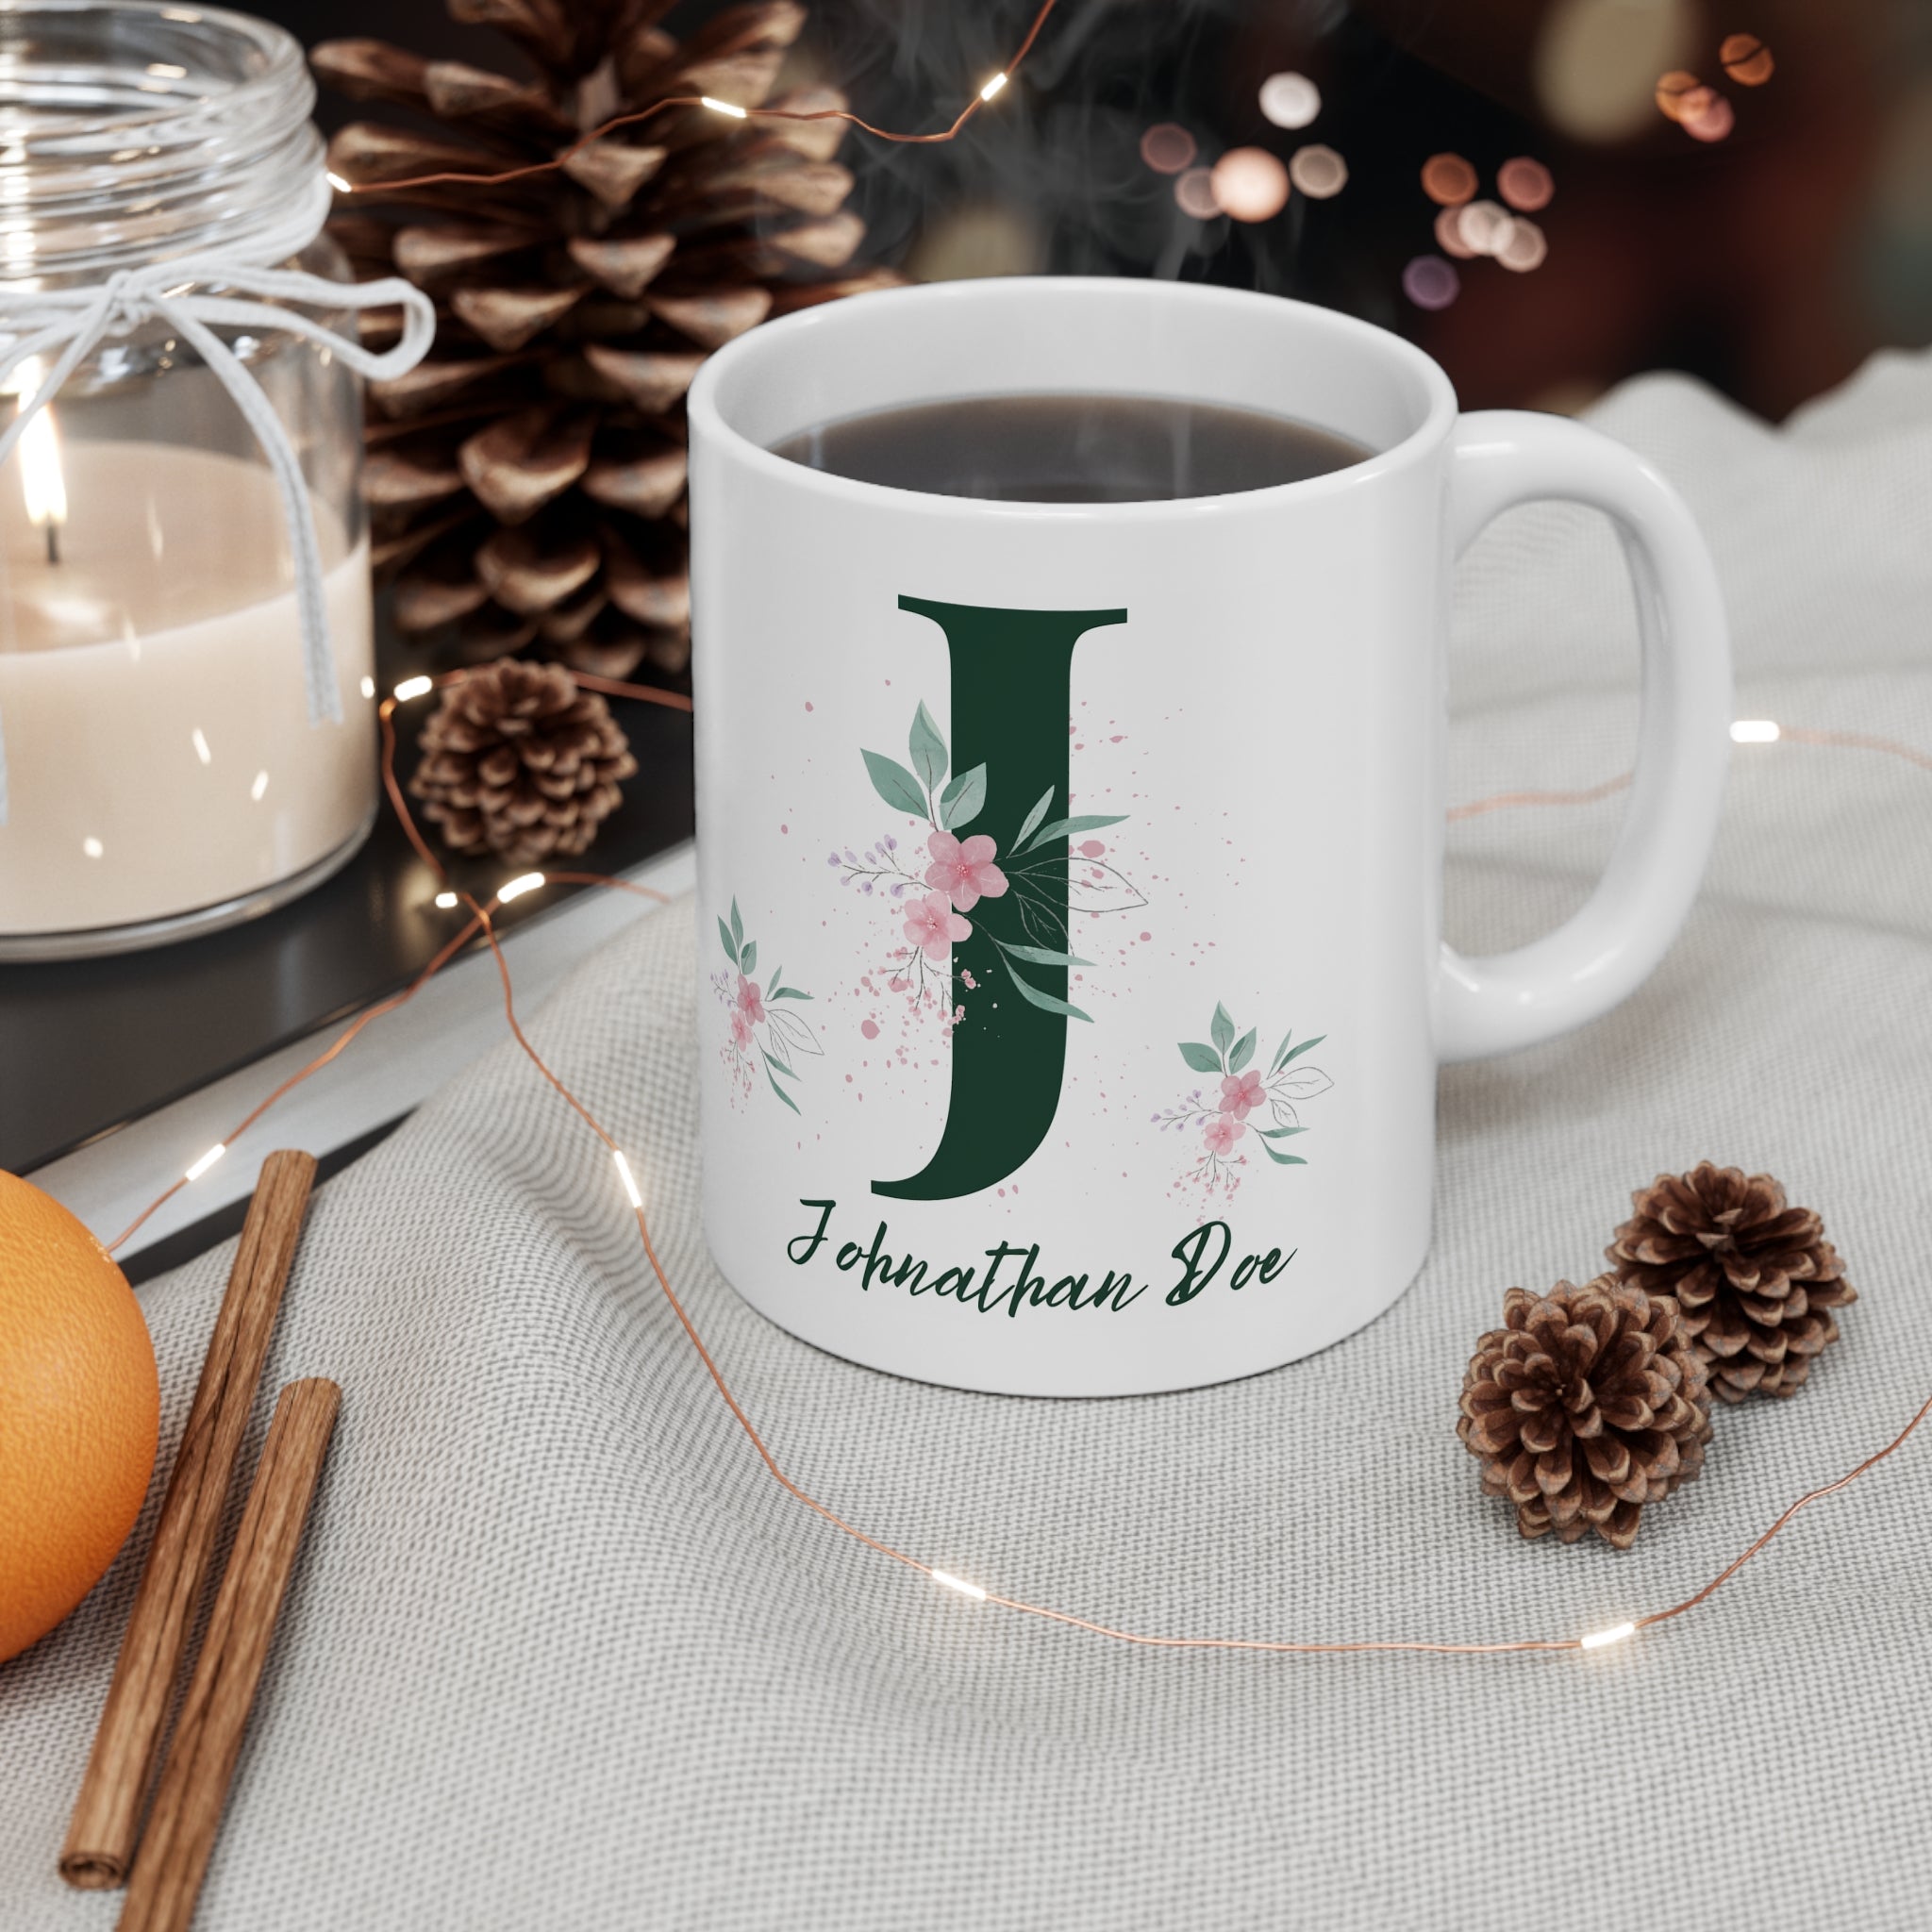 Create Memories with Our Personalized Name and Initials Floral Ceramic Mug 11oz  - A Custom Keepsake to Sip and Smile